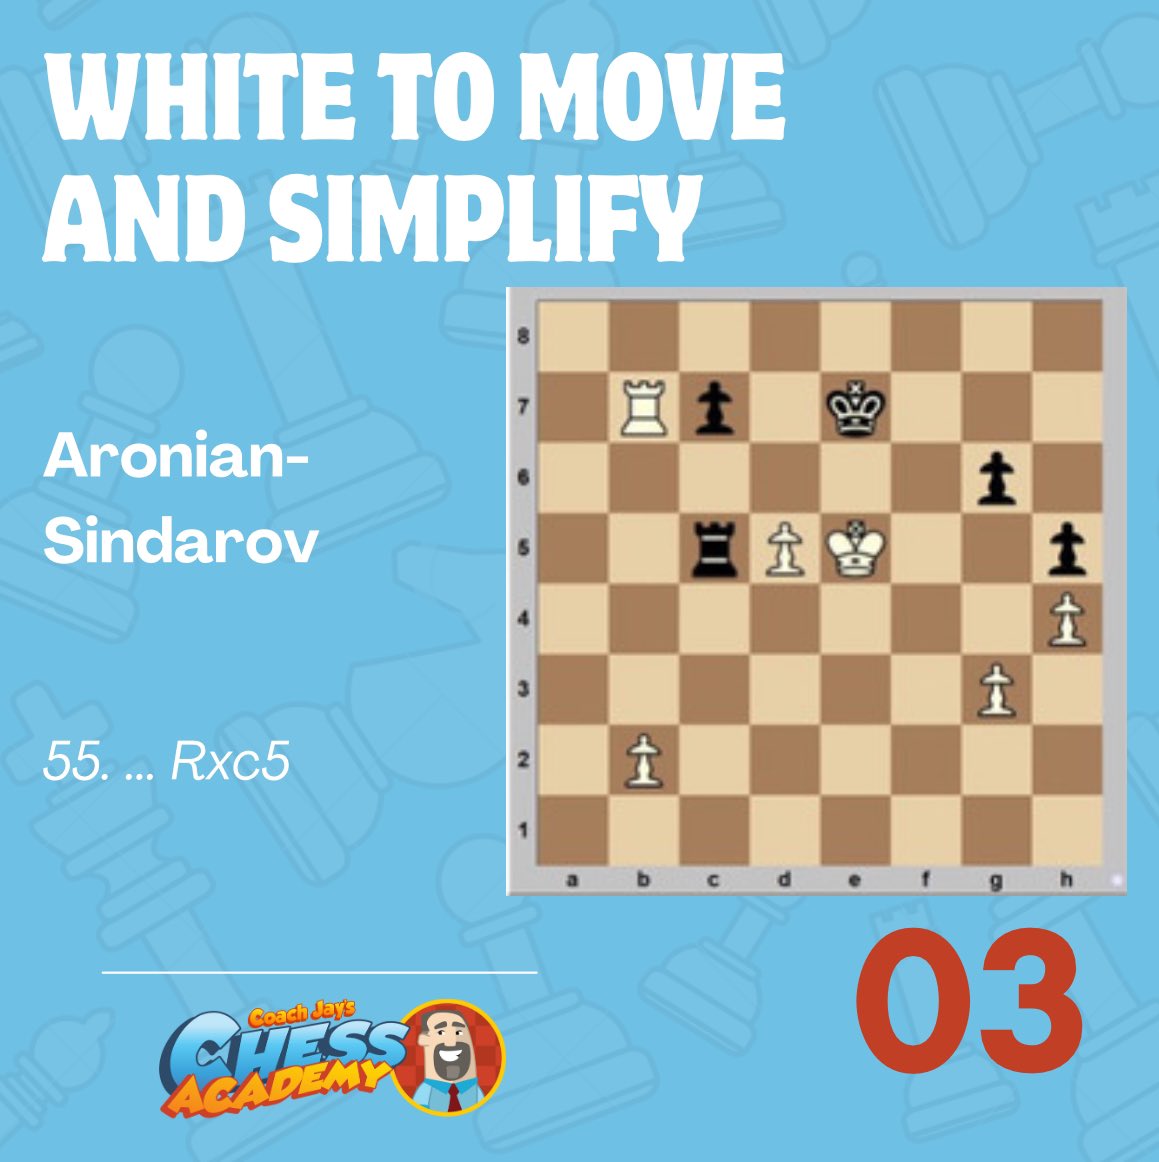 Check out the strategic brilliance of Grandmaster Levon Aronian's most instructive endgame moves from 2023. Use these masterful maneuvers to sharpen your students’ skills!

#Chess #Grandmaster #ChessCoach #ChessTips #CoachJayChess #CoachJayChessAcademy